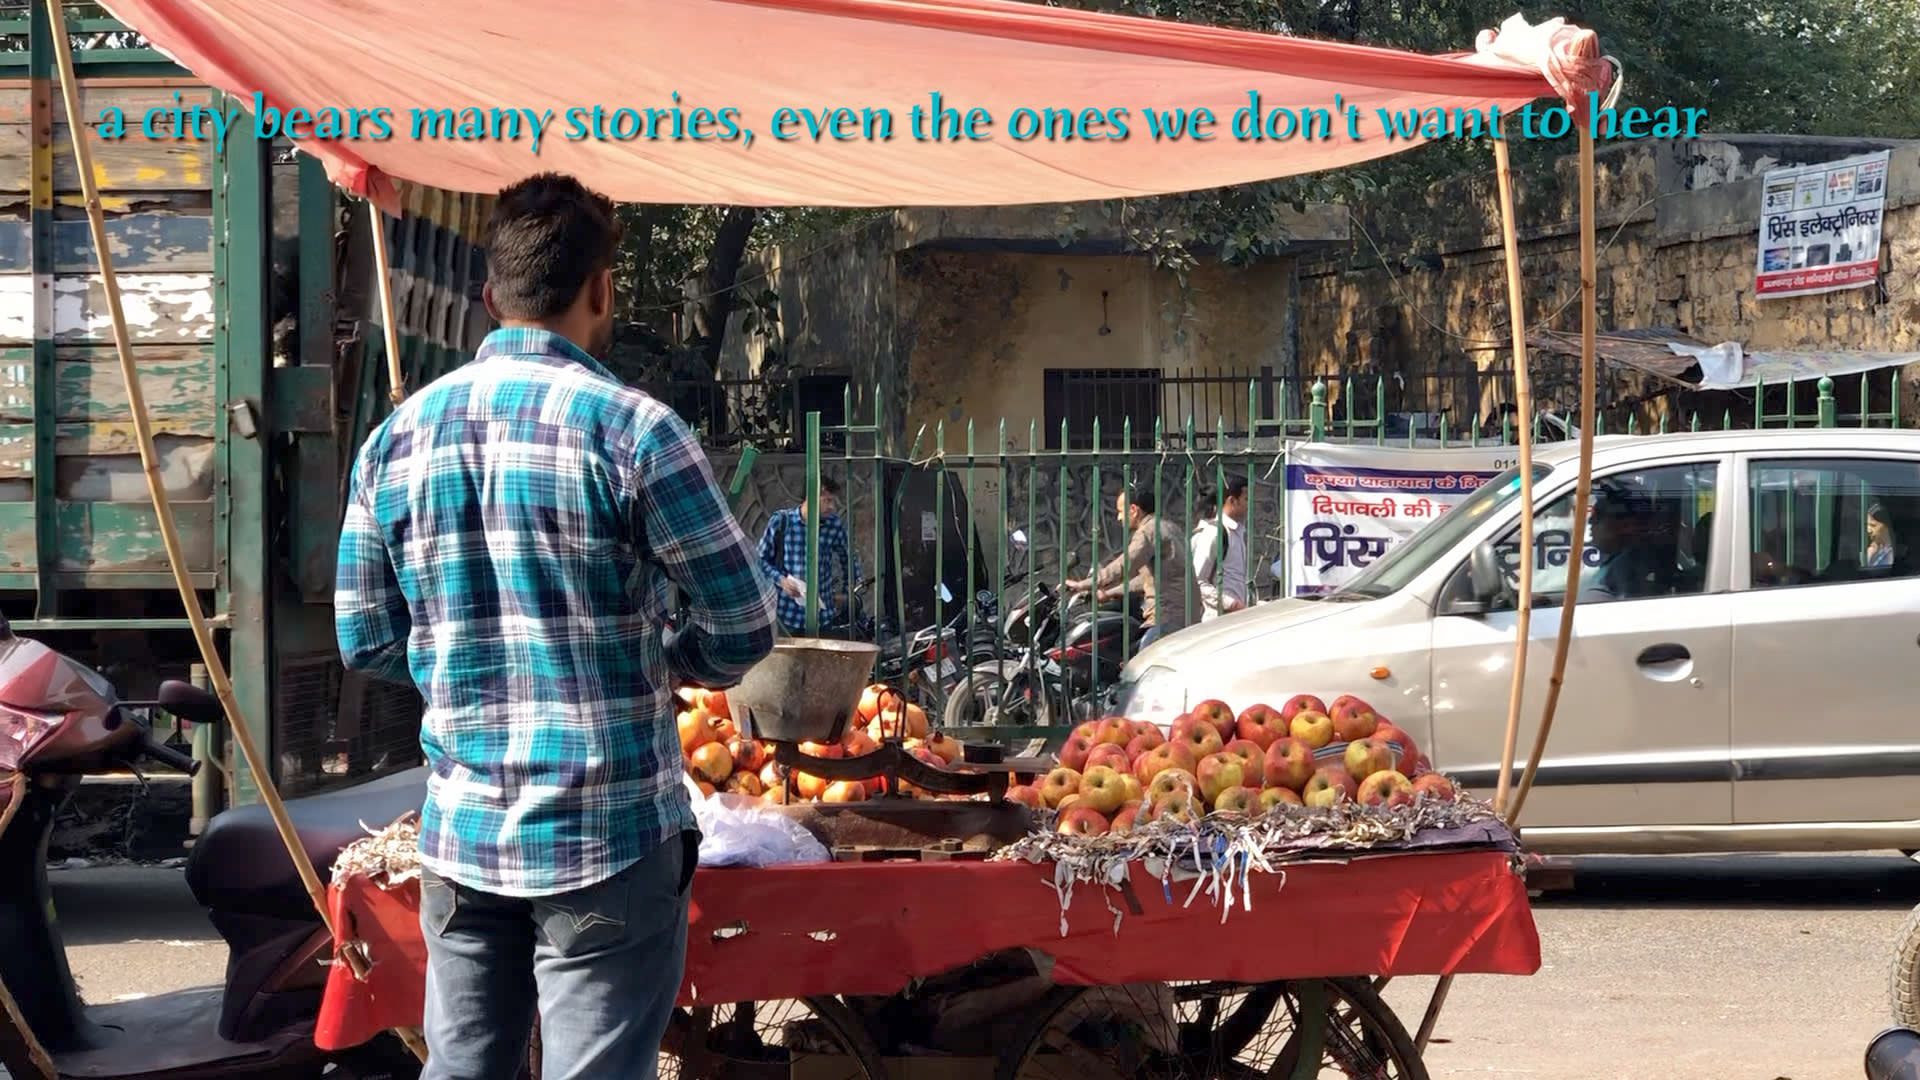 A figure stands with it's back turned in front of an apple cart on the street of an Indian city with the text 'a city bears many stories, even the ones we don't want to hear' across the top.